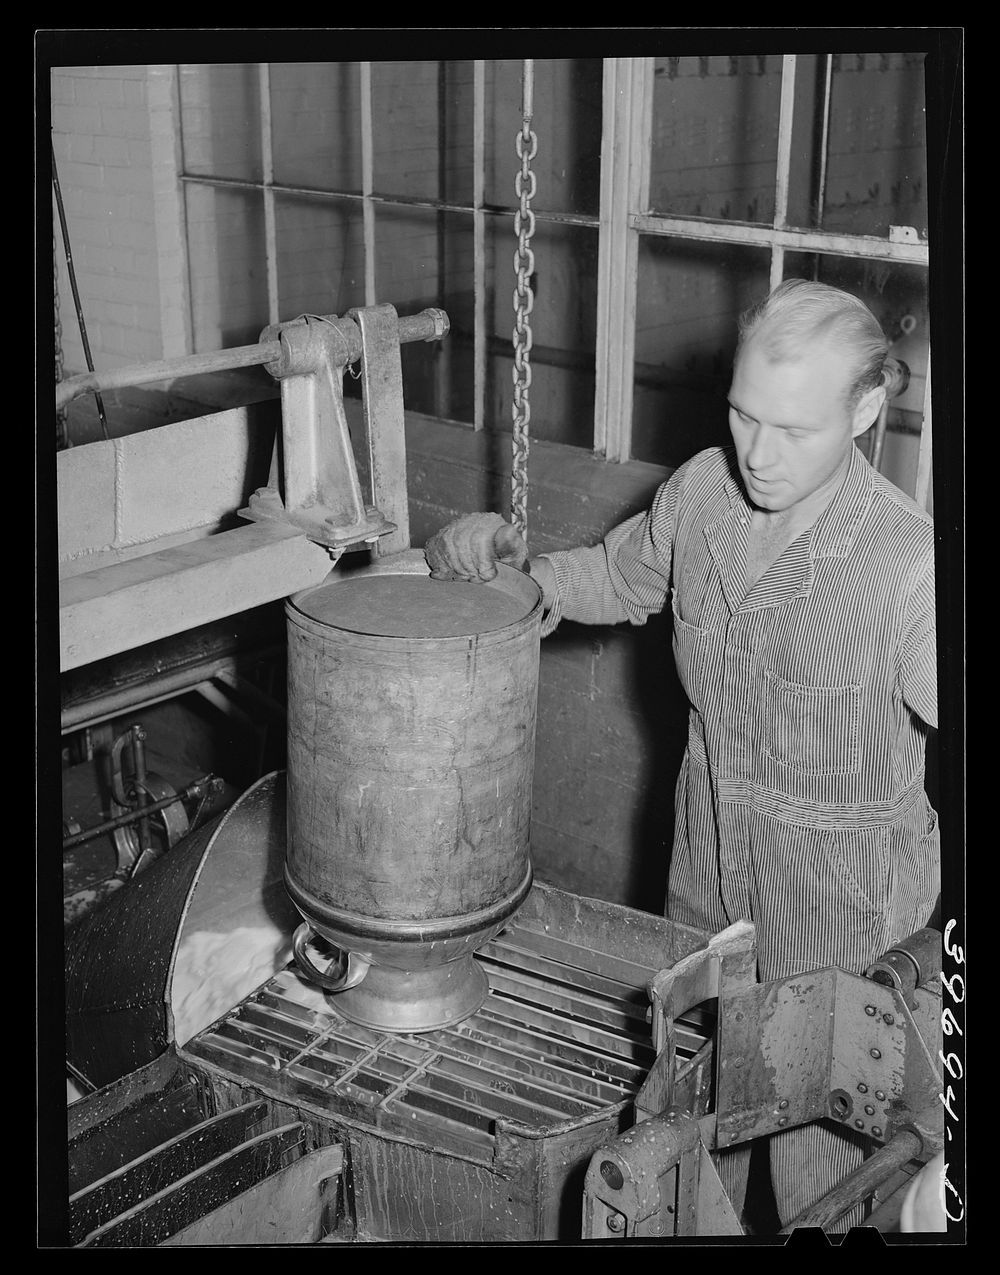 [Untitled photo, possibly related to: Dumping milk into container where it will be weighted and the weight automatically…